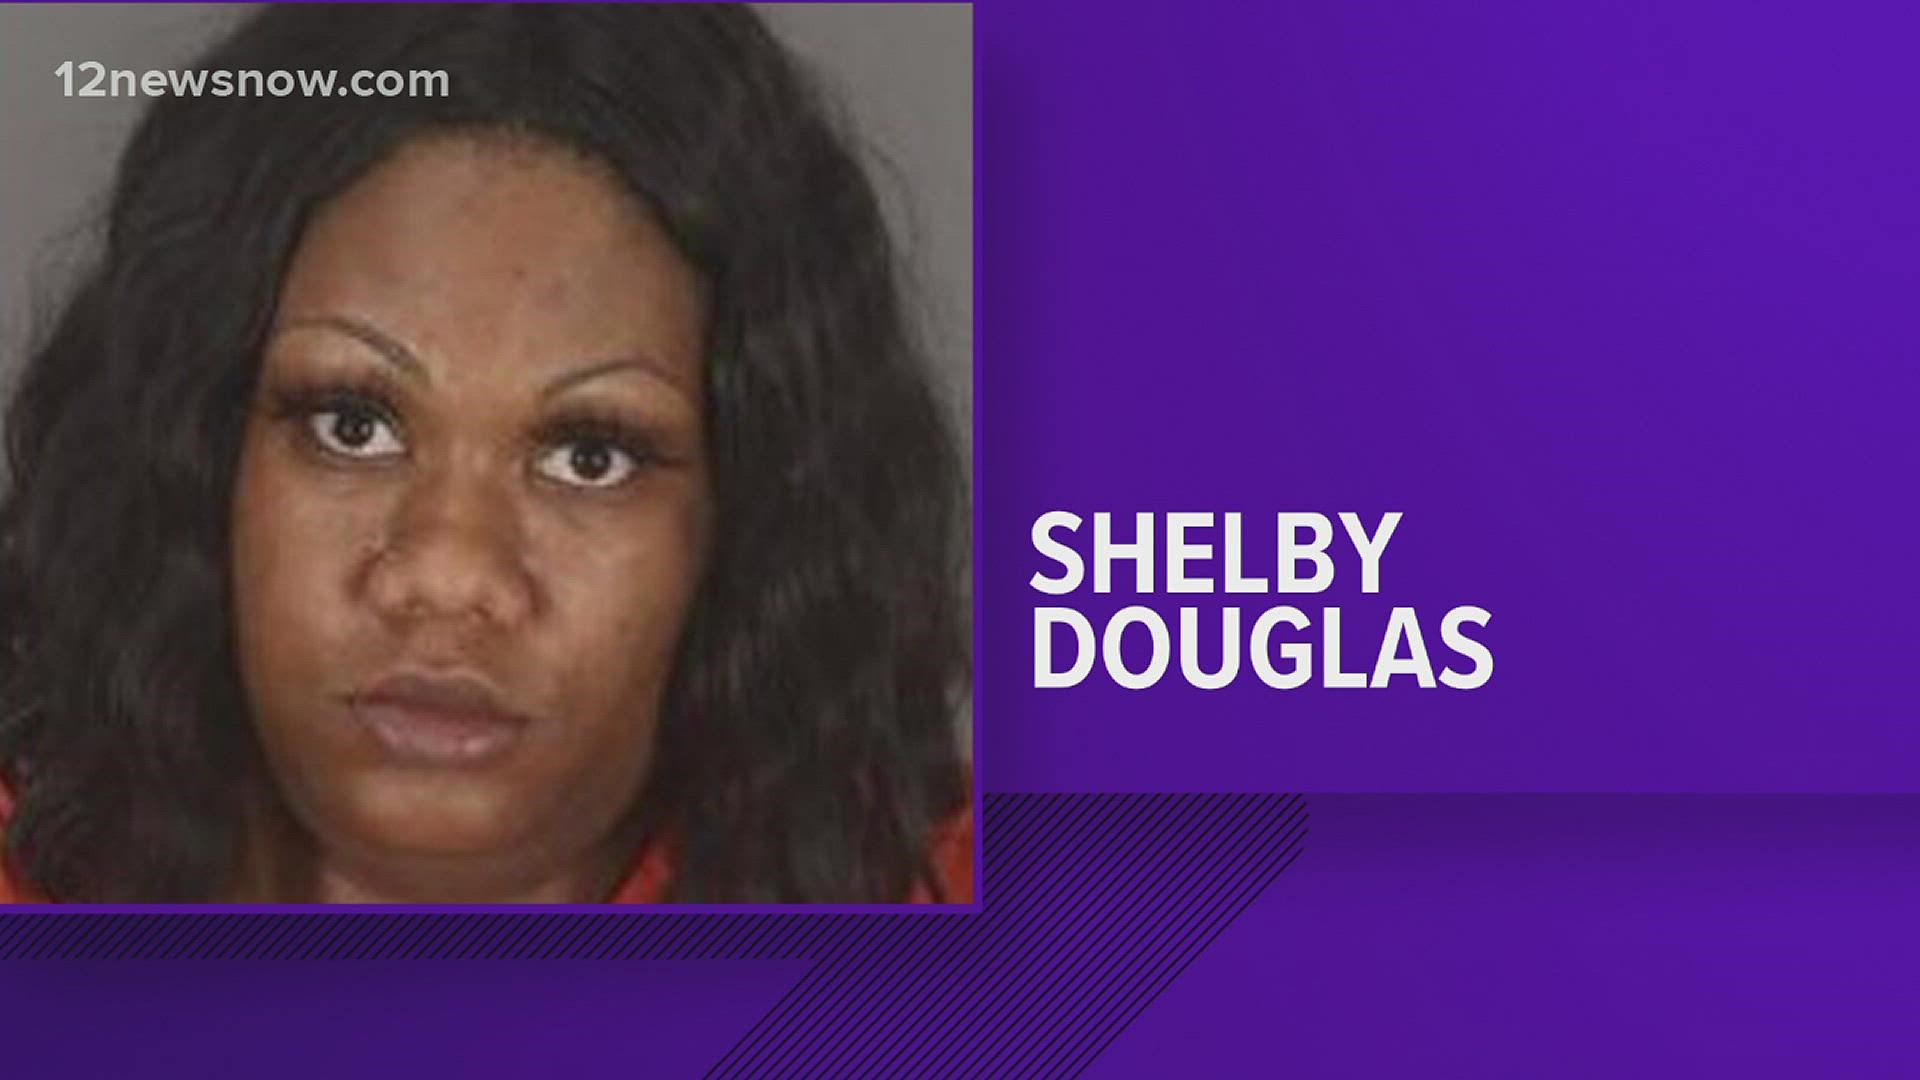 Beaumont woman pleads guilty, gets 10 year probation for 2021 hit and run that killed 70-year-old man 12newsnow